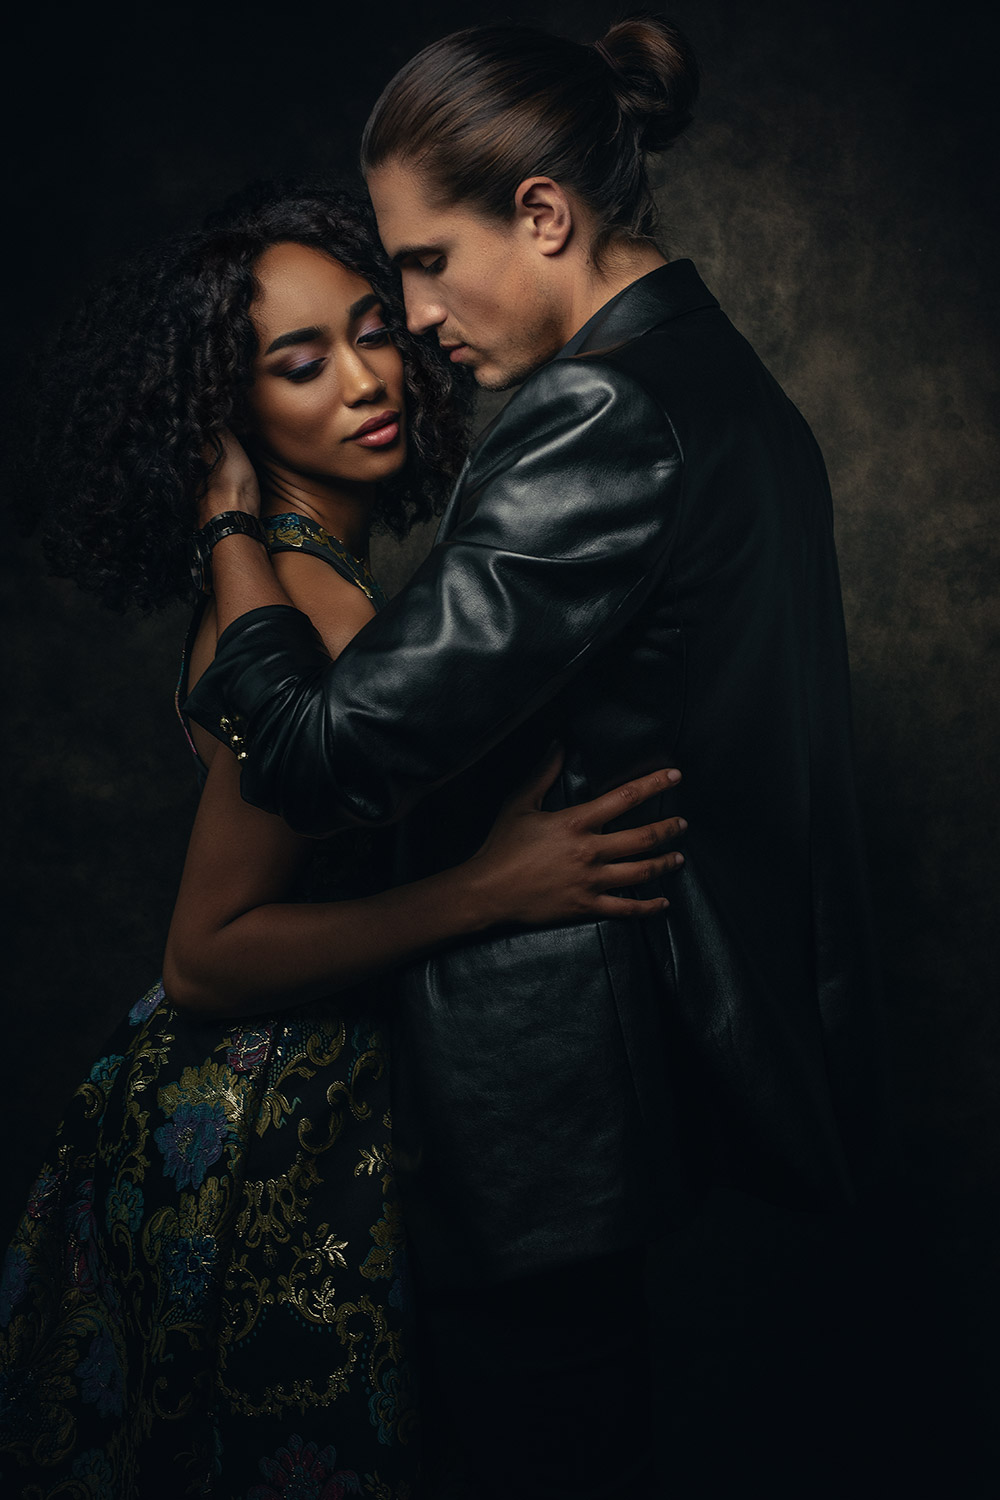 man in leather jacket embraces woman in colorful gown with gold accents in a moody lit portrait